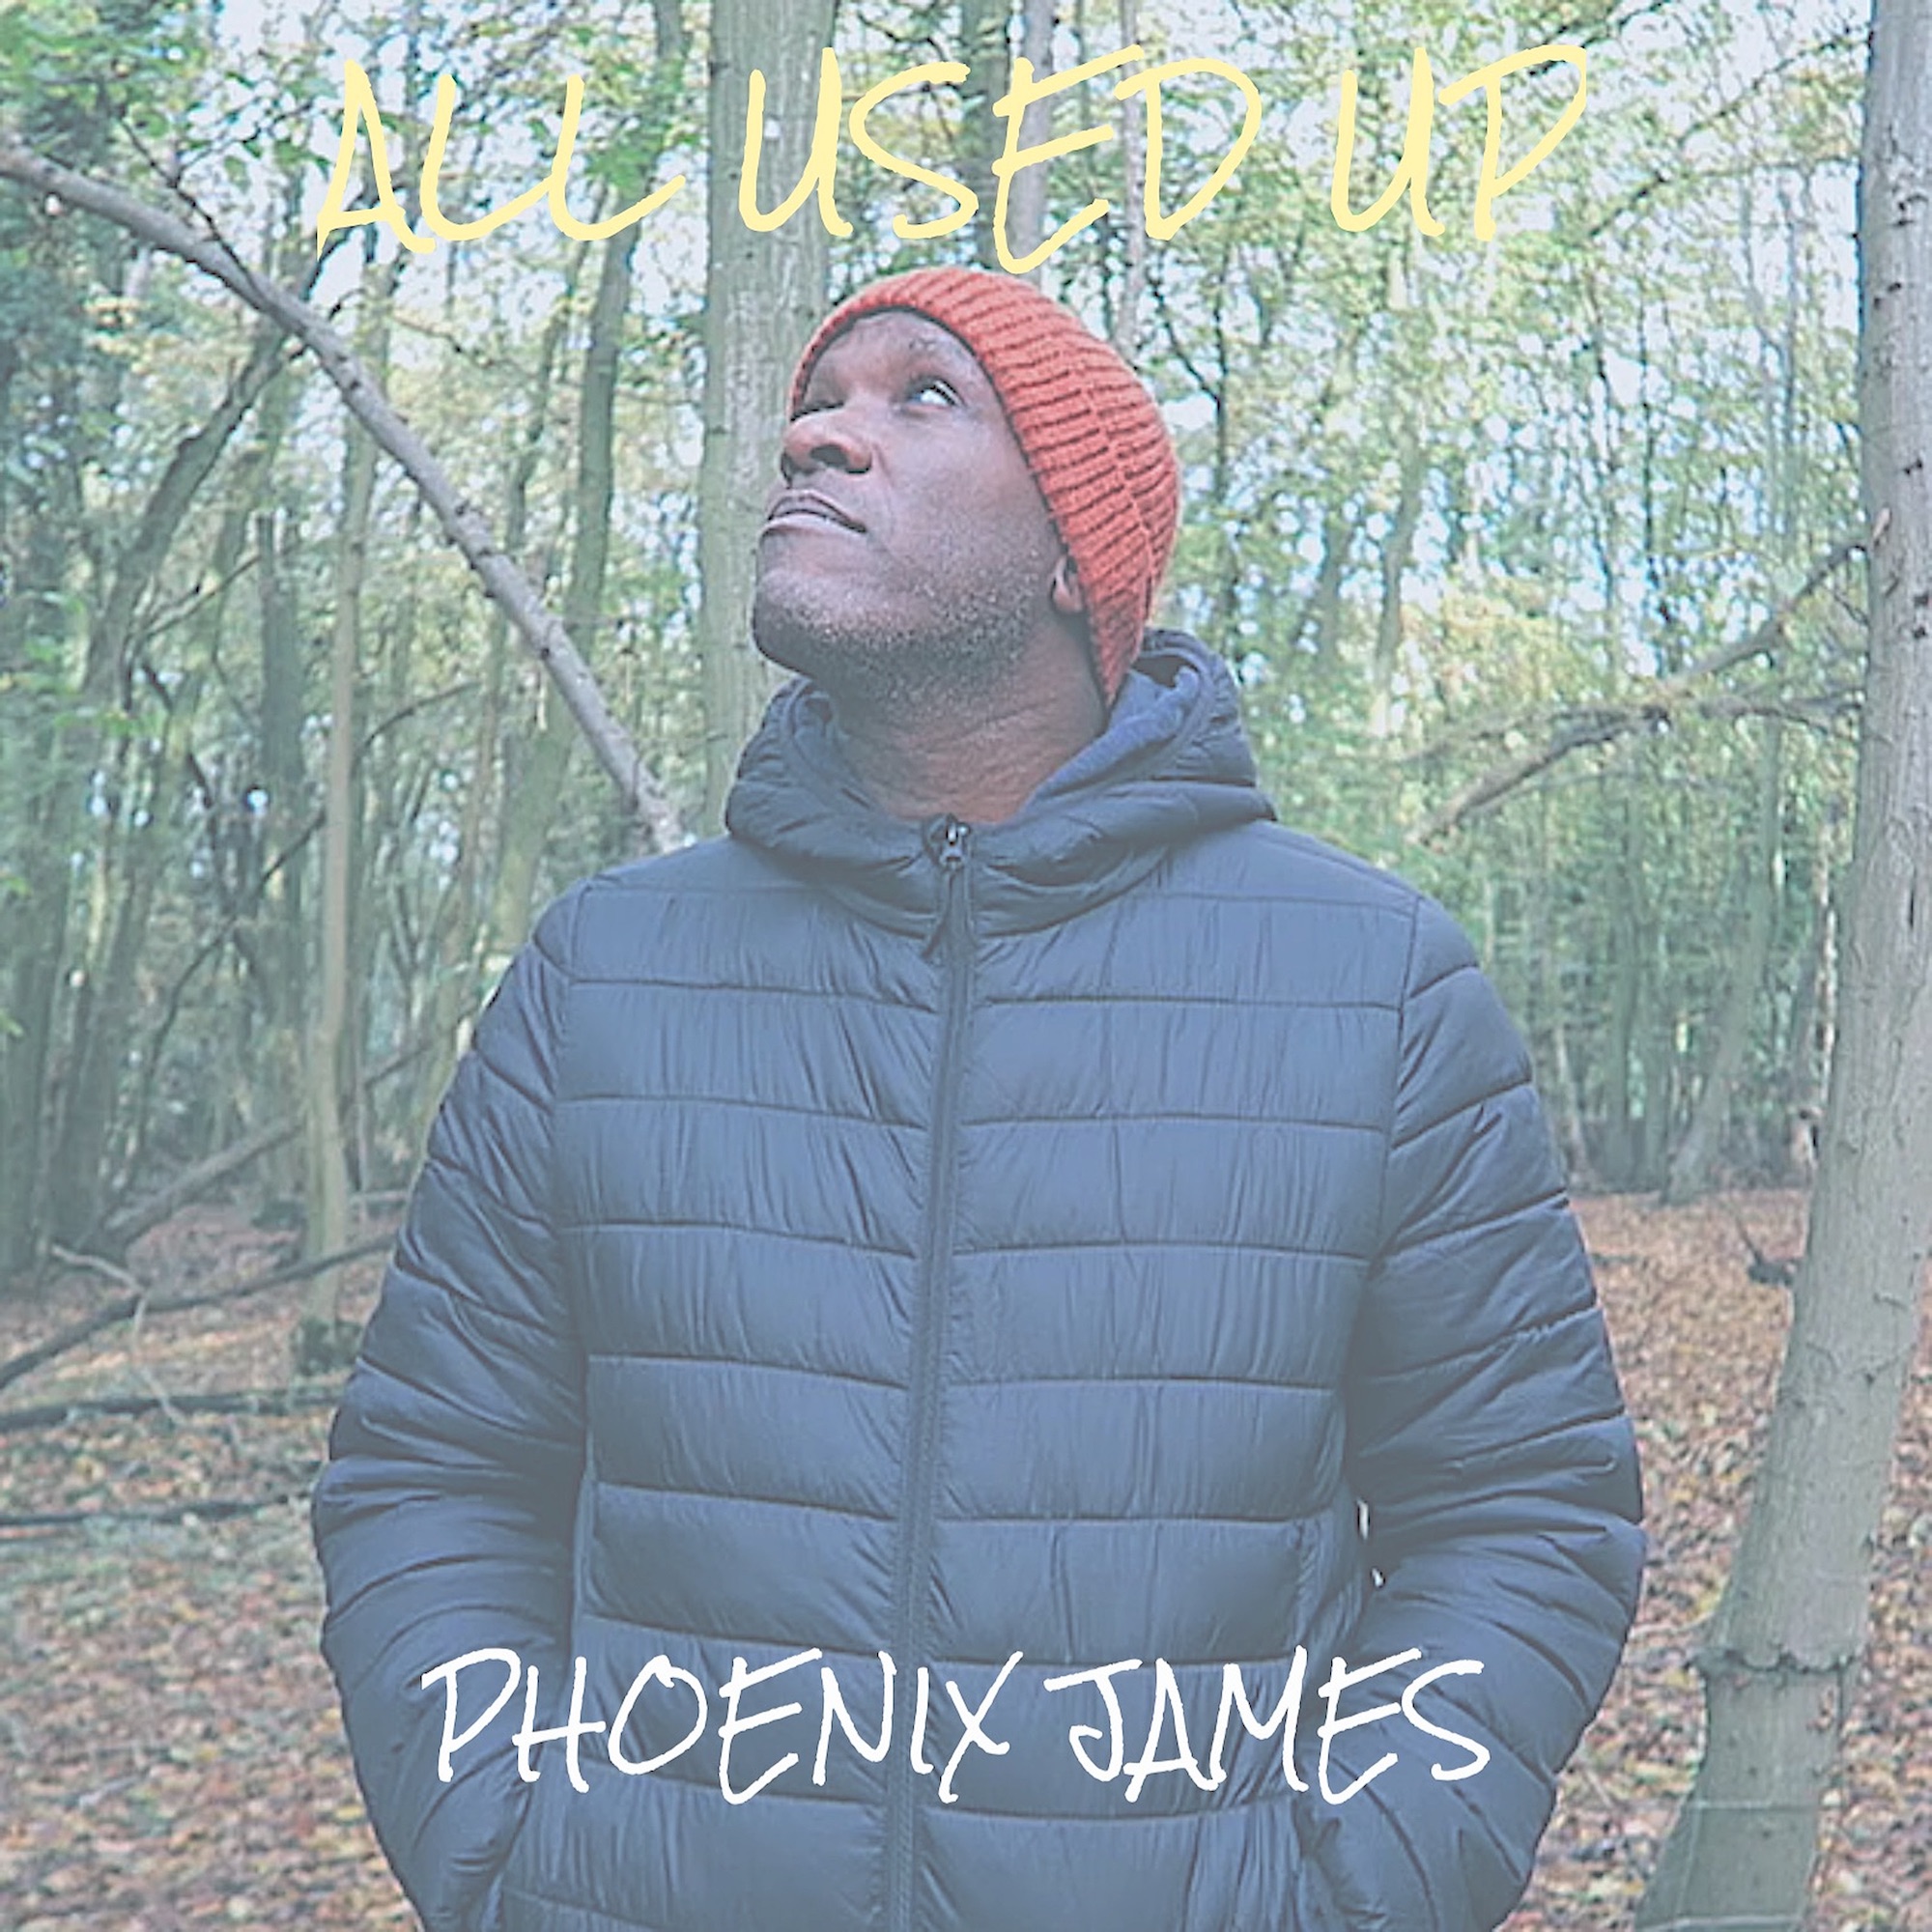 ALL USED UP - SPOKEN WORD POETRY BY PHOENIX JAMES OFFICIAL PHENZWAAN